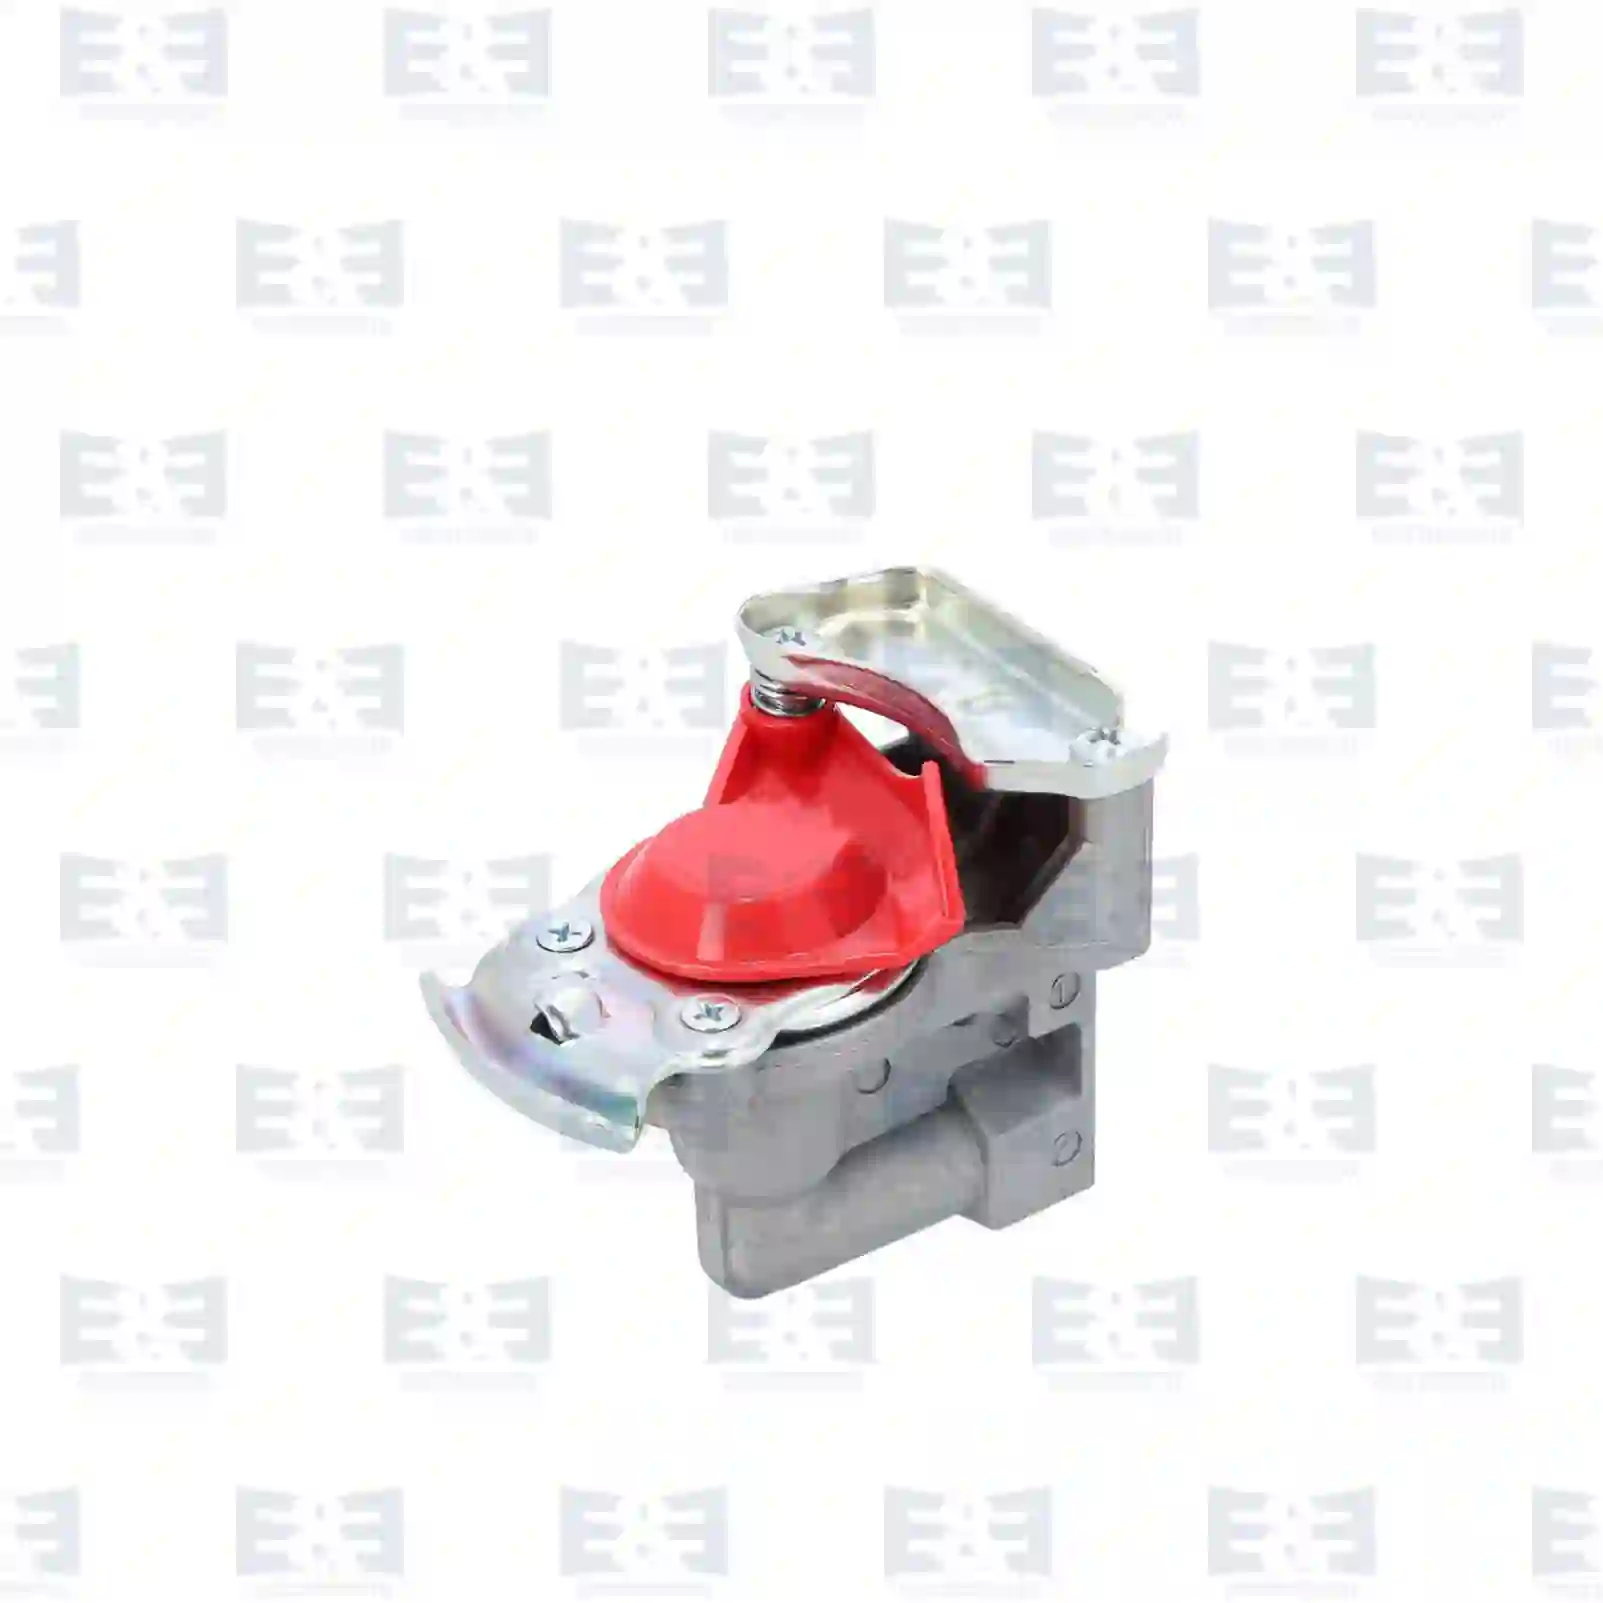 Compressed Air Palm coupling, red lid, EE No 2E2286244 ,  oem no:0031062, 1505130, 31062, 02515298, 02515436, 02516898, 02521369, 04323303, 04715226, 04841035, 42070652, 42088851, 504186403, 71005207, 02516792, 02516808, 02516902, 02521371, 04463725, 04463735, 2516792, 2516808, 2516902, 2521371, 42159059, 79429, 502966508, 502966514, 81512206034, 81512206037, 81512206039, 81512206042, 81512206066, 81512206077, 0004293730, 0004294930, 0004295330, 0004296330, 0004297830, 5021170411, 5516017524, 1935532, 8283987000, 600607344 E&E Truck Spare Parts | Truck Spare Parts, Auotomotive Spare Parts